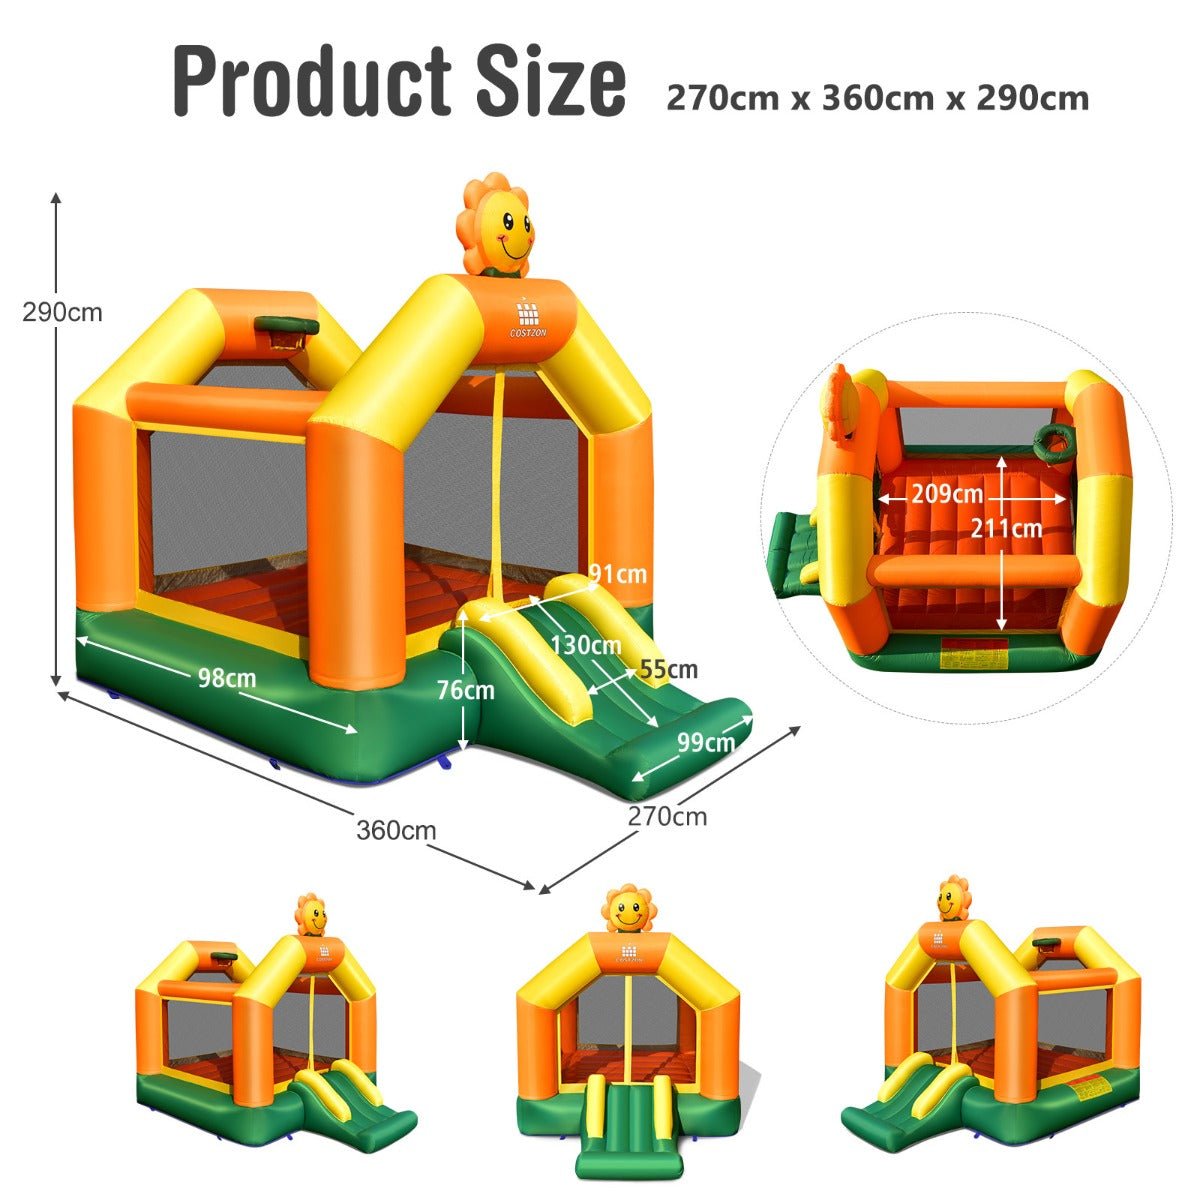 Sunflower Theme Bounce House with Slide - Smiles Guaranteed